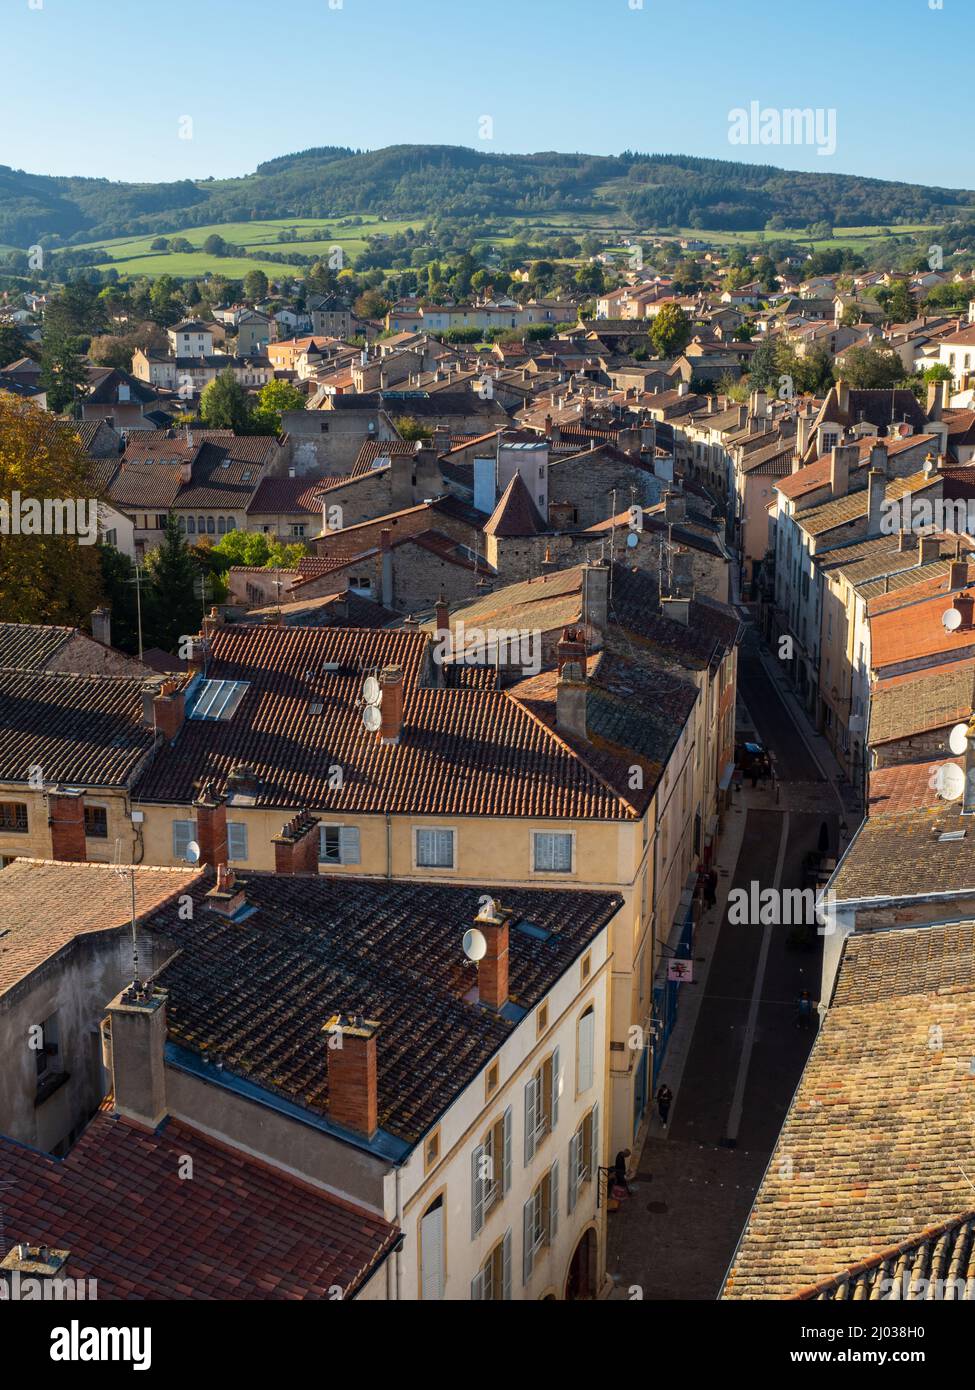 Looking down on the town of Cluny from the Cheese Tower, Cluny, Saone-et-Loire, Burgundy, France, Europe Stock Photo